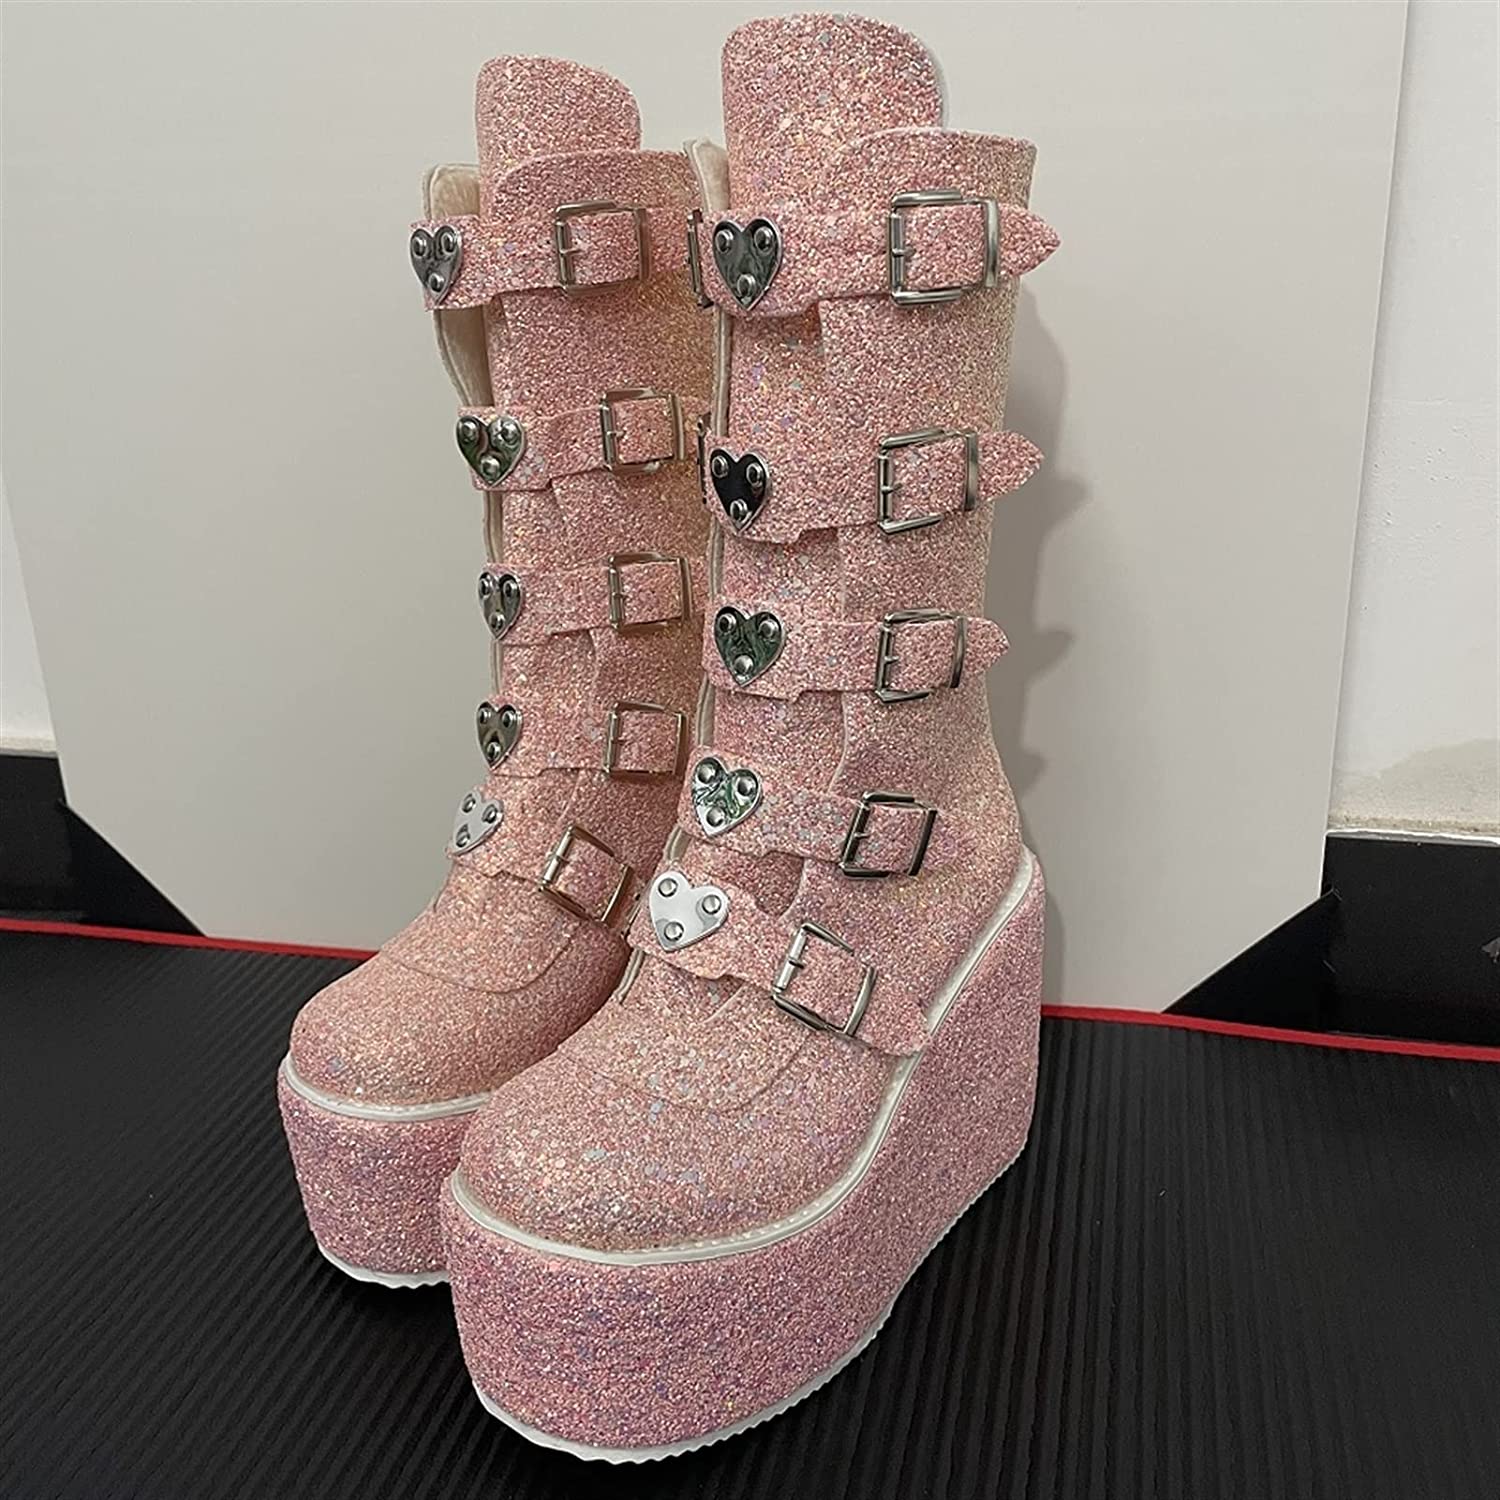 Buckle Strap Glitter High Heel Chunky Platform Boots (4 Colors) 9 Sizes